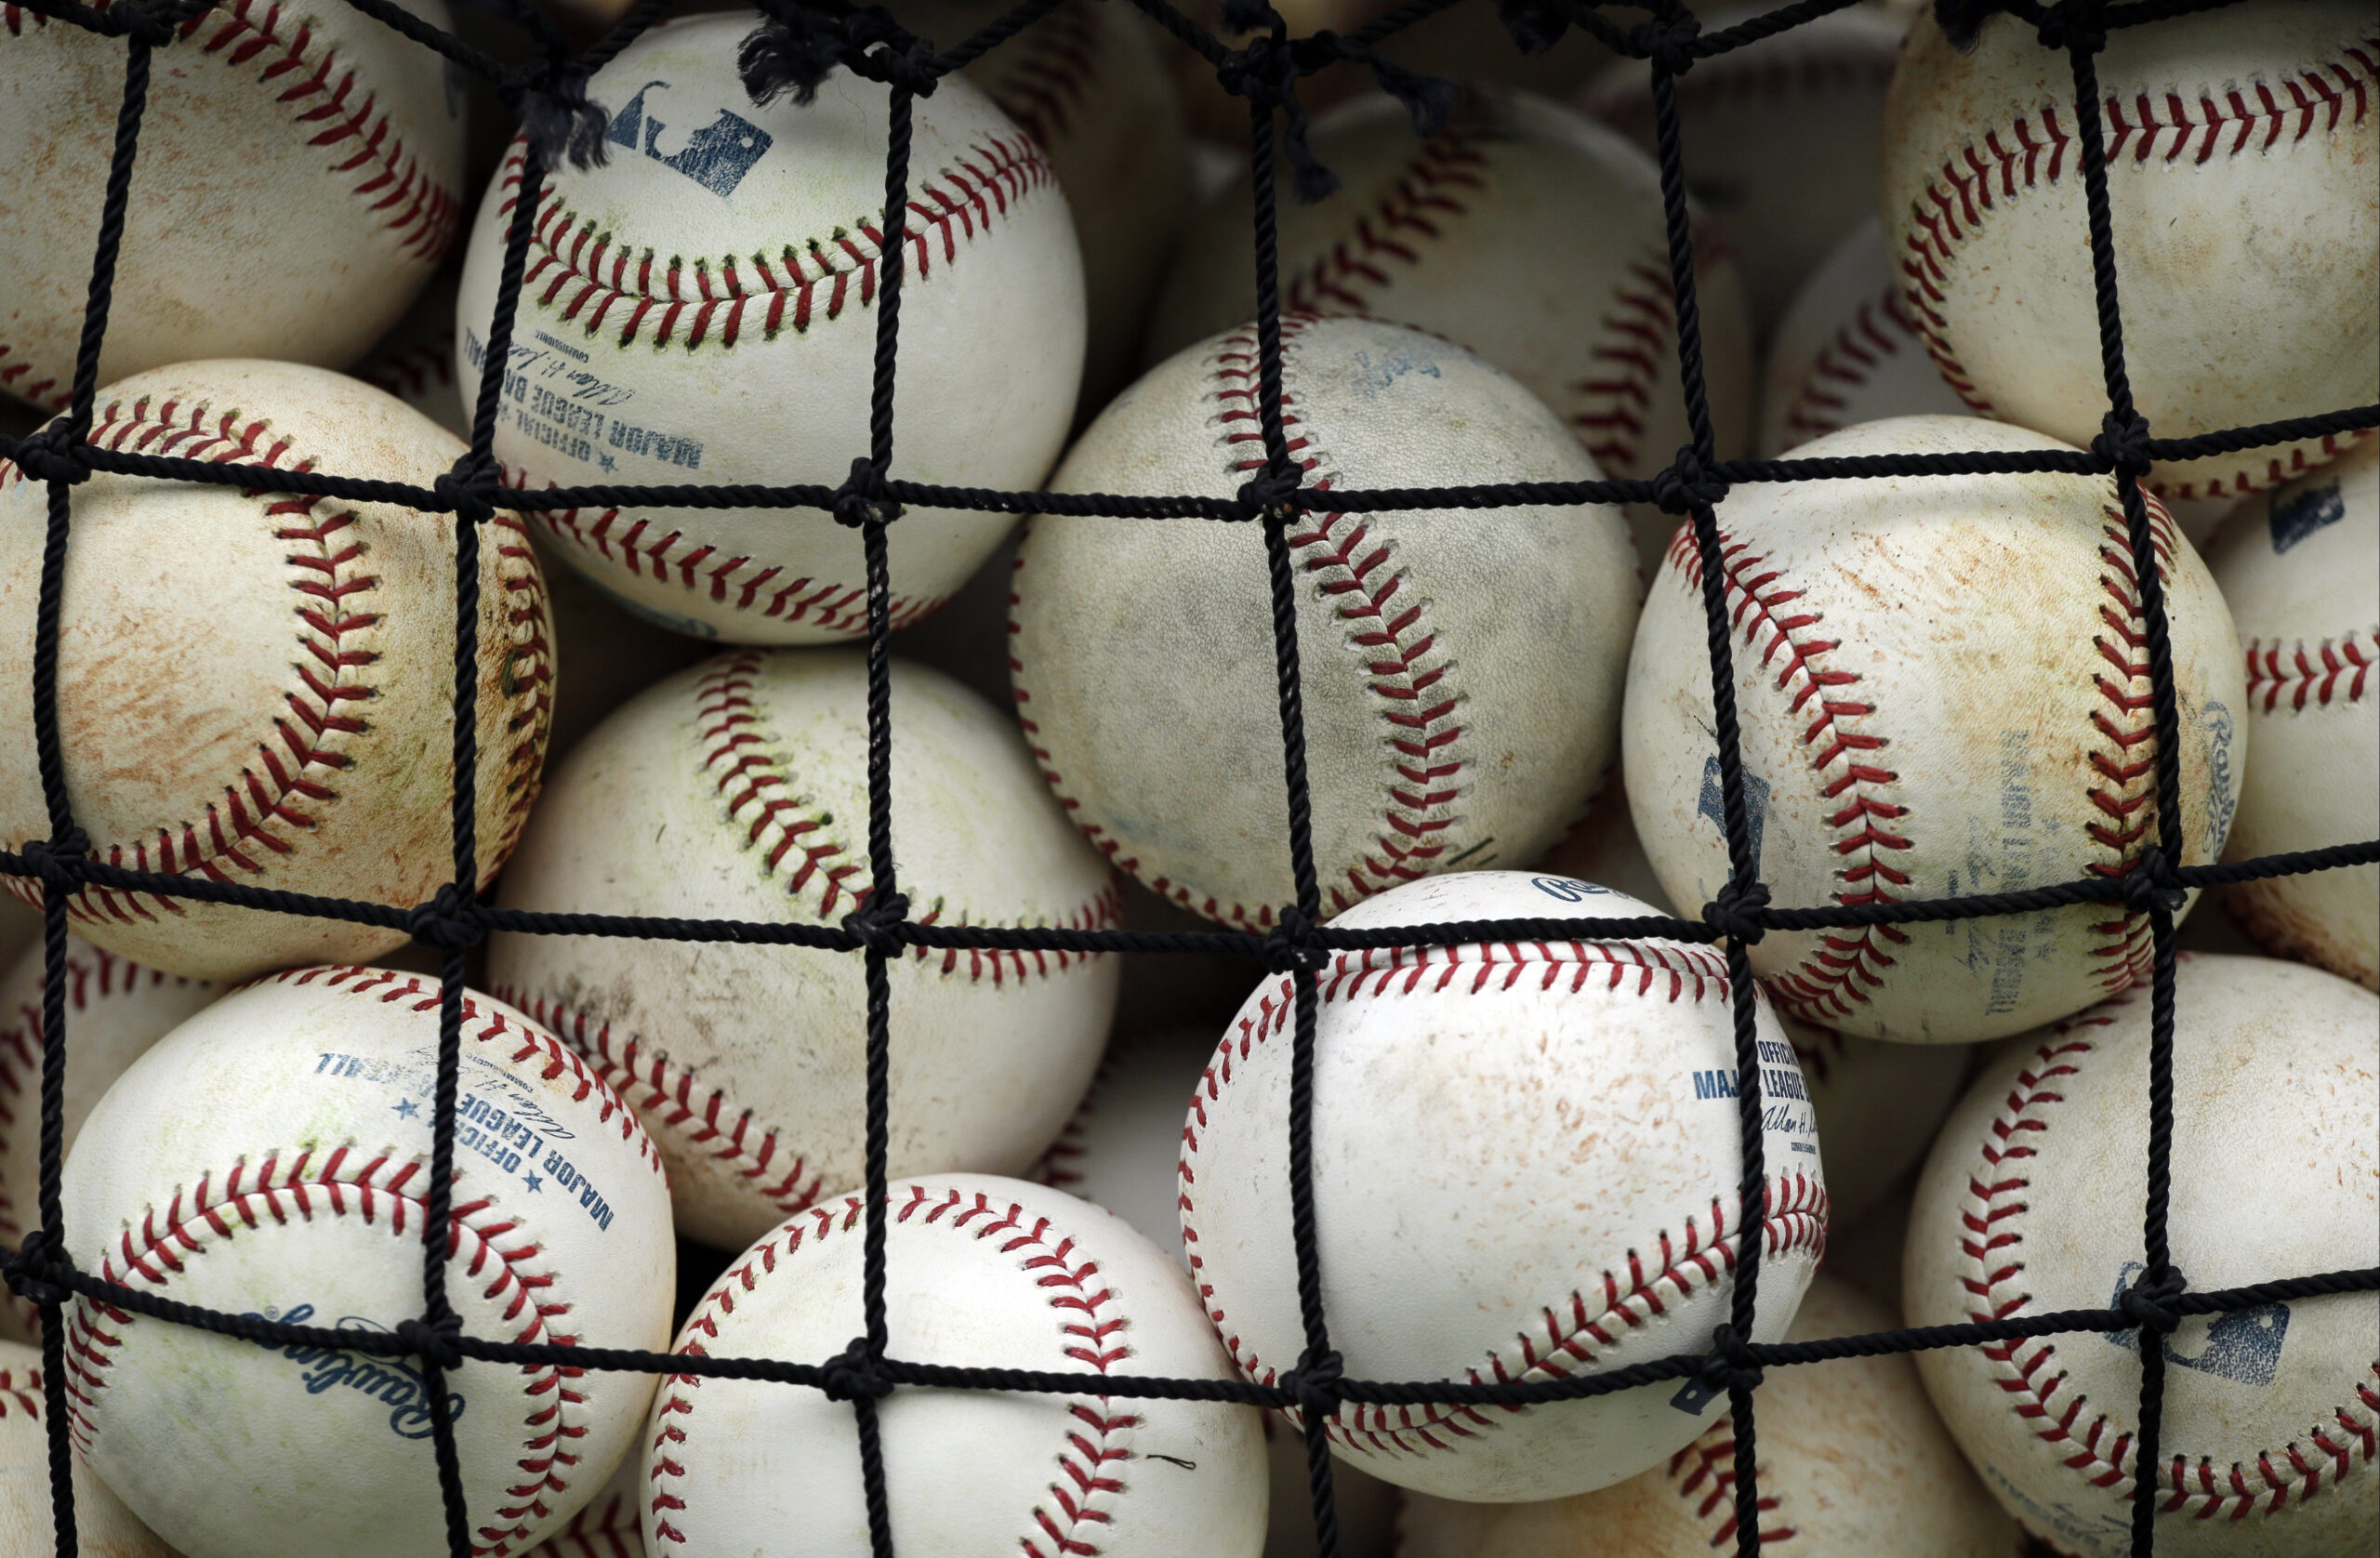 A pile of baseballs sit in a rope net.